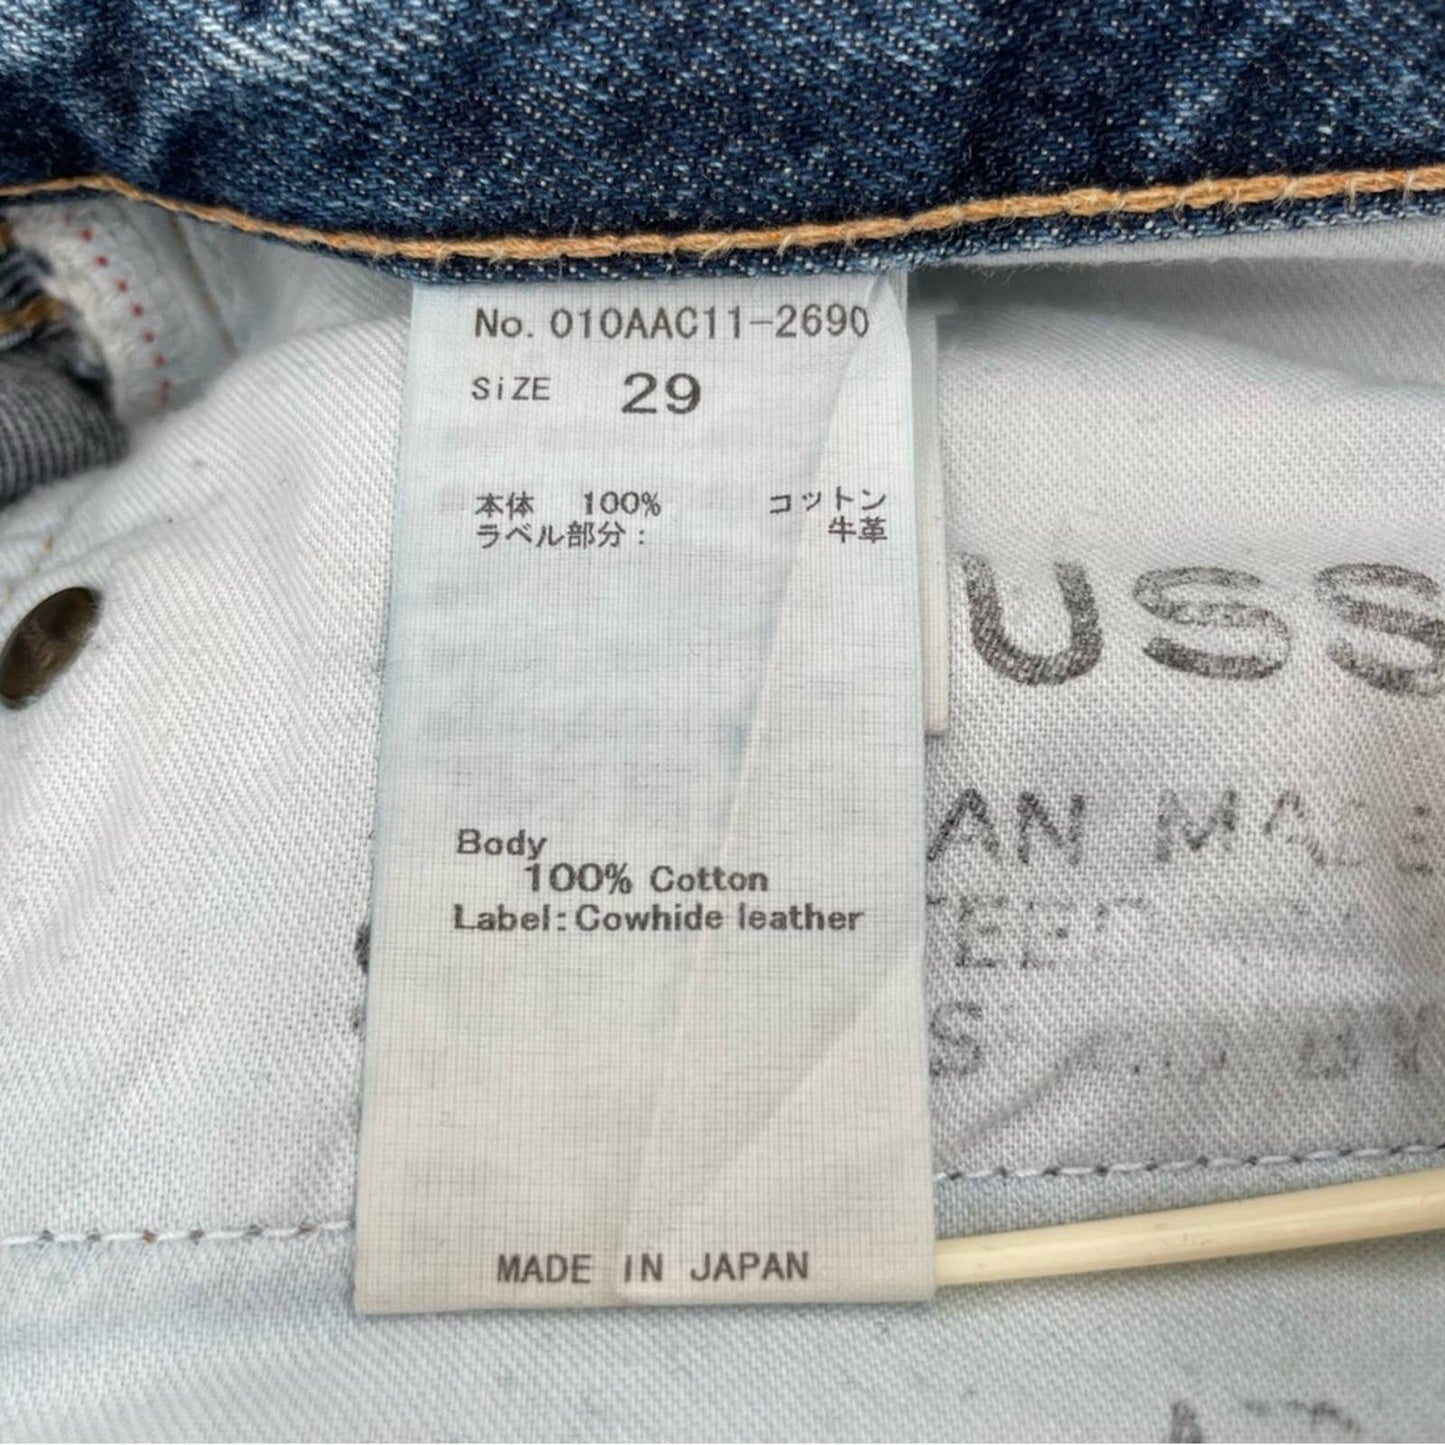 Moussy Denim Premium Distressed Mid Blue Jeans Rips Chewed Hems Style 010AAC11-2690 Size 29